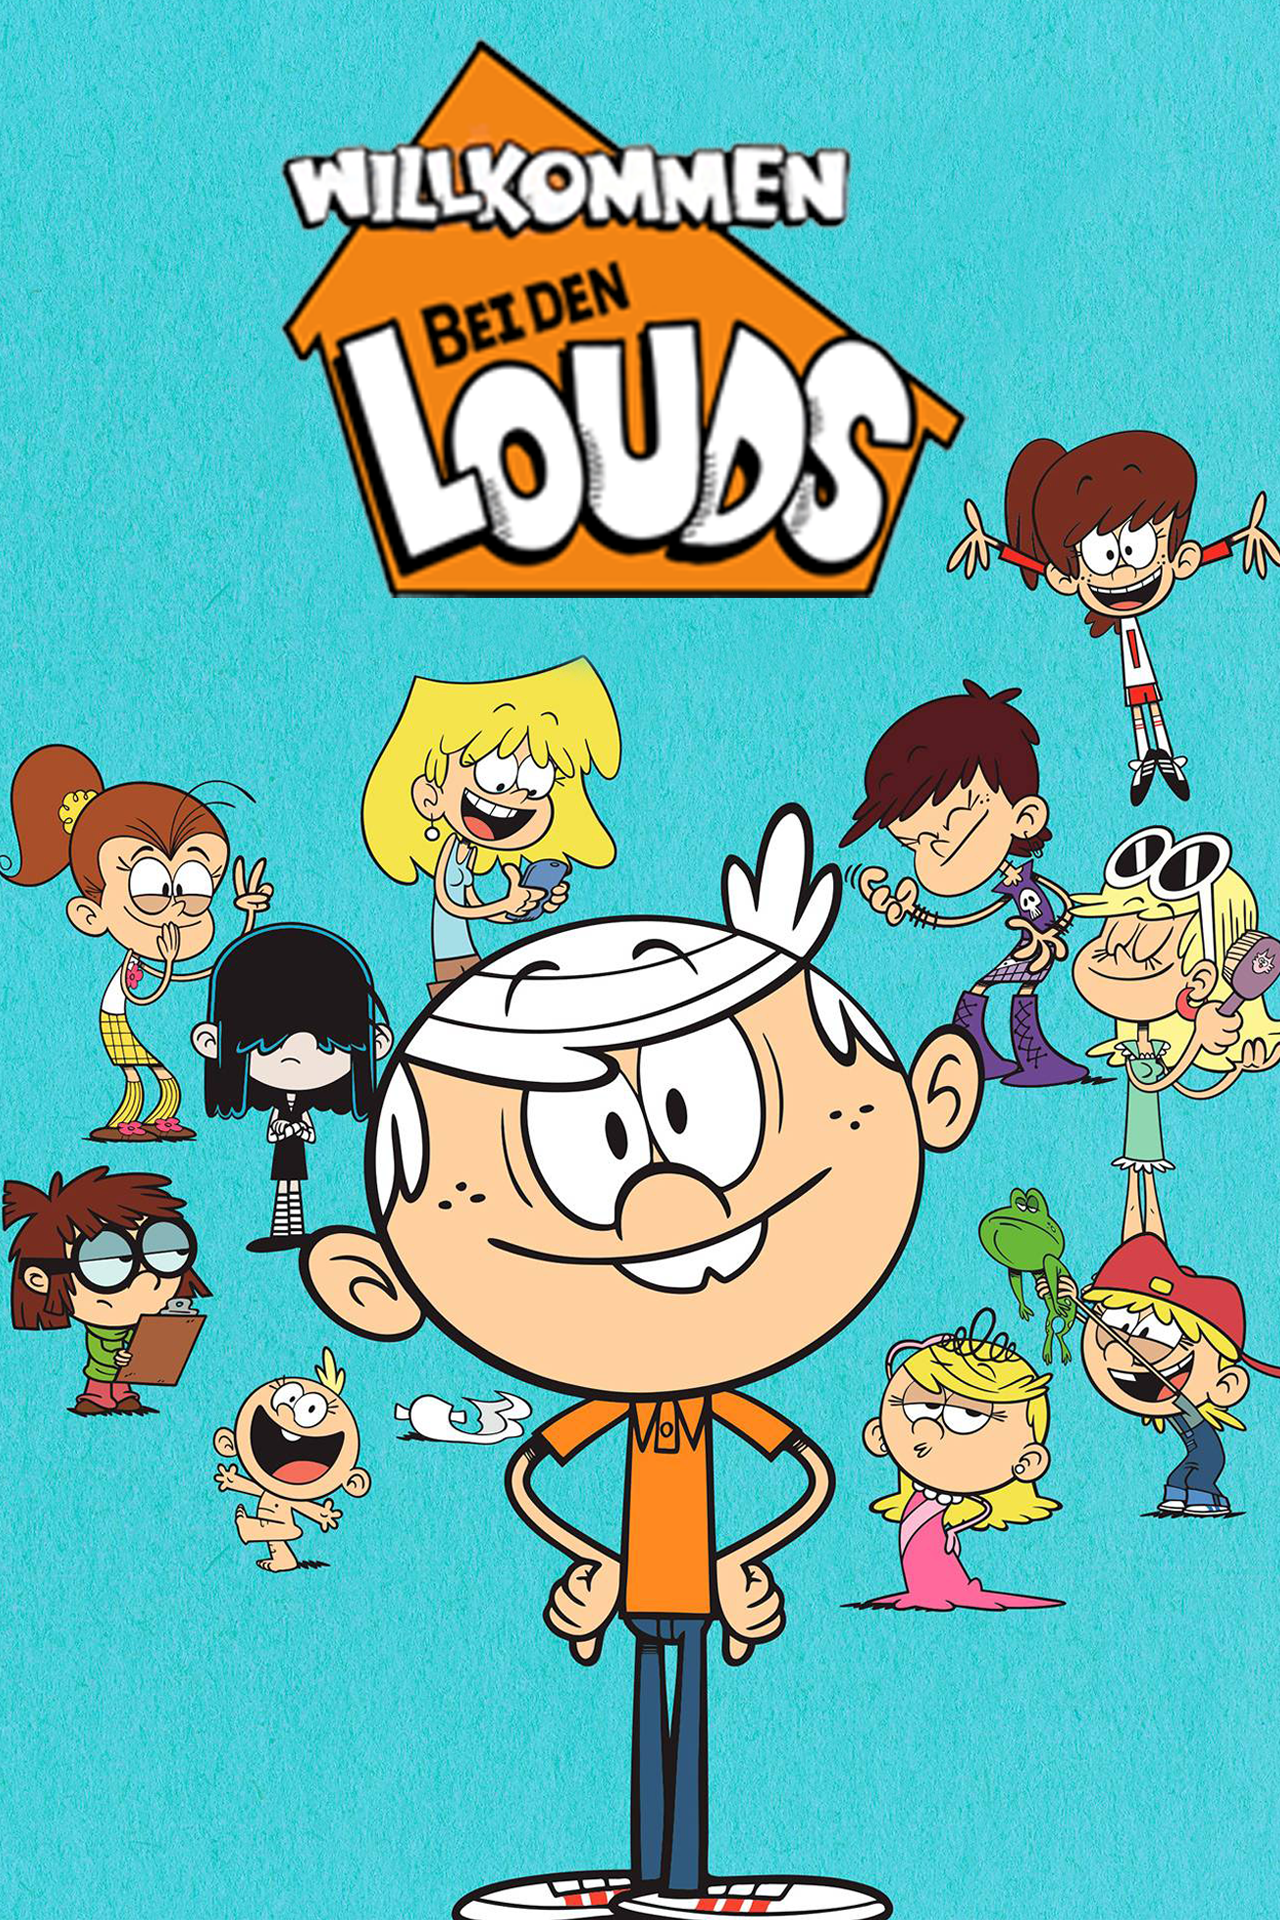 https://static.wikia.nocookie.net/international-entertainment-project/images/a/aa/The_Loud_House_-_poster_%28German%29.png/revision/latest?cb=20220923022733